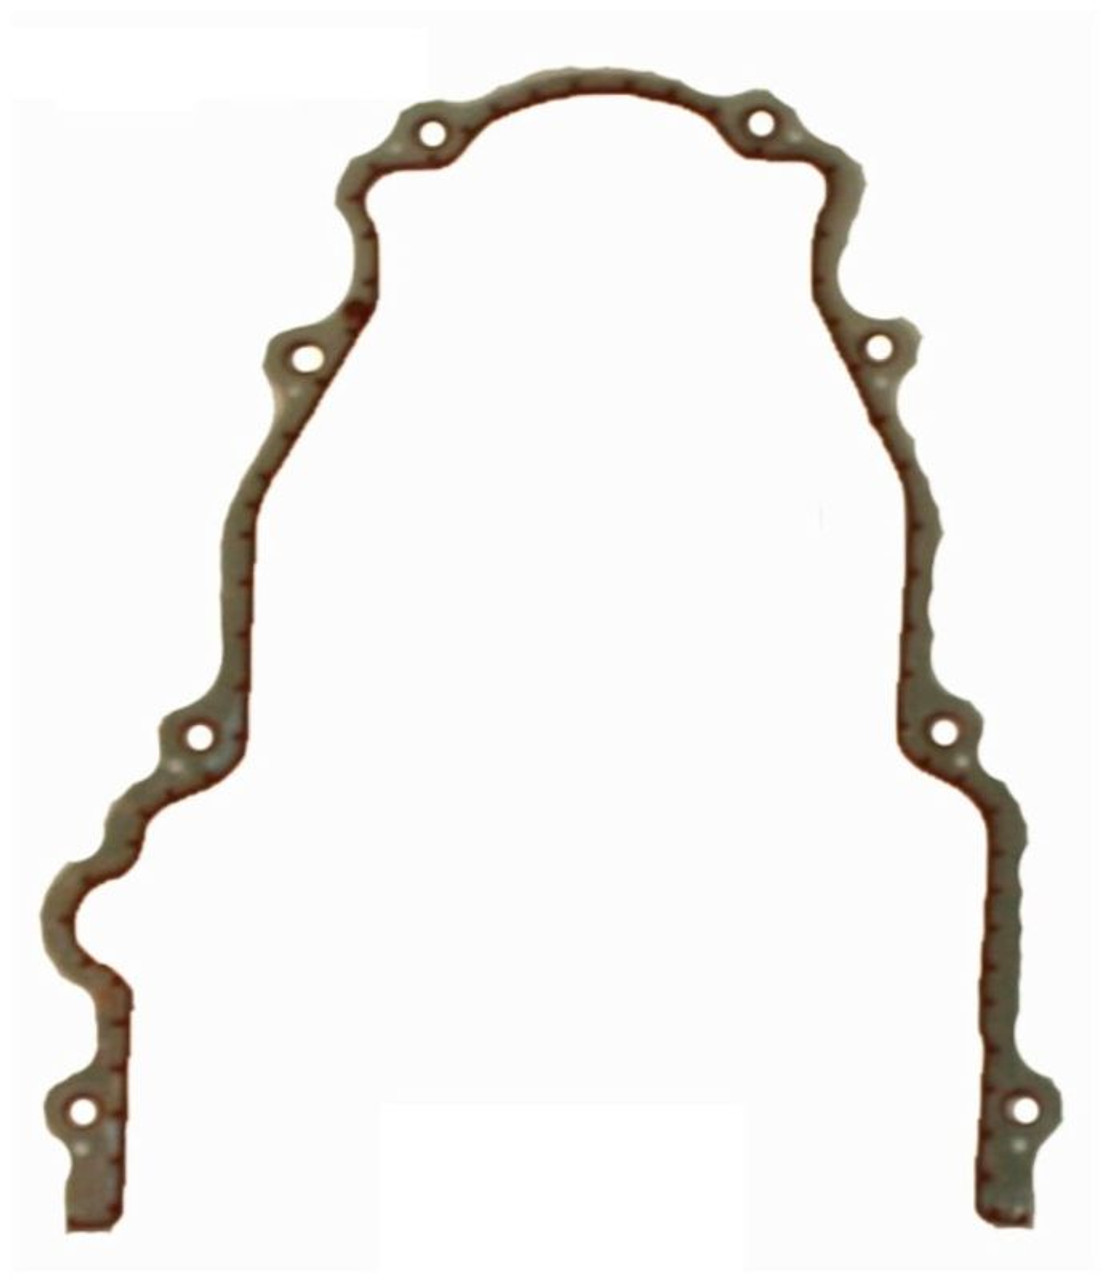 2010 Hummer H3T 5.3L Engine Timing Cover Gasket TCG293-A -695